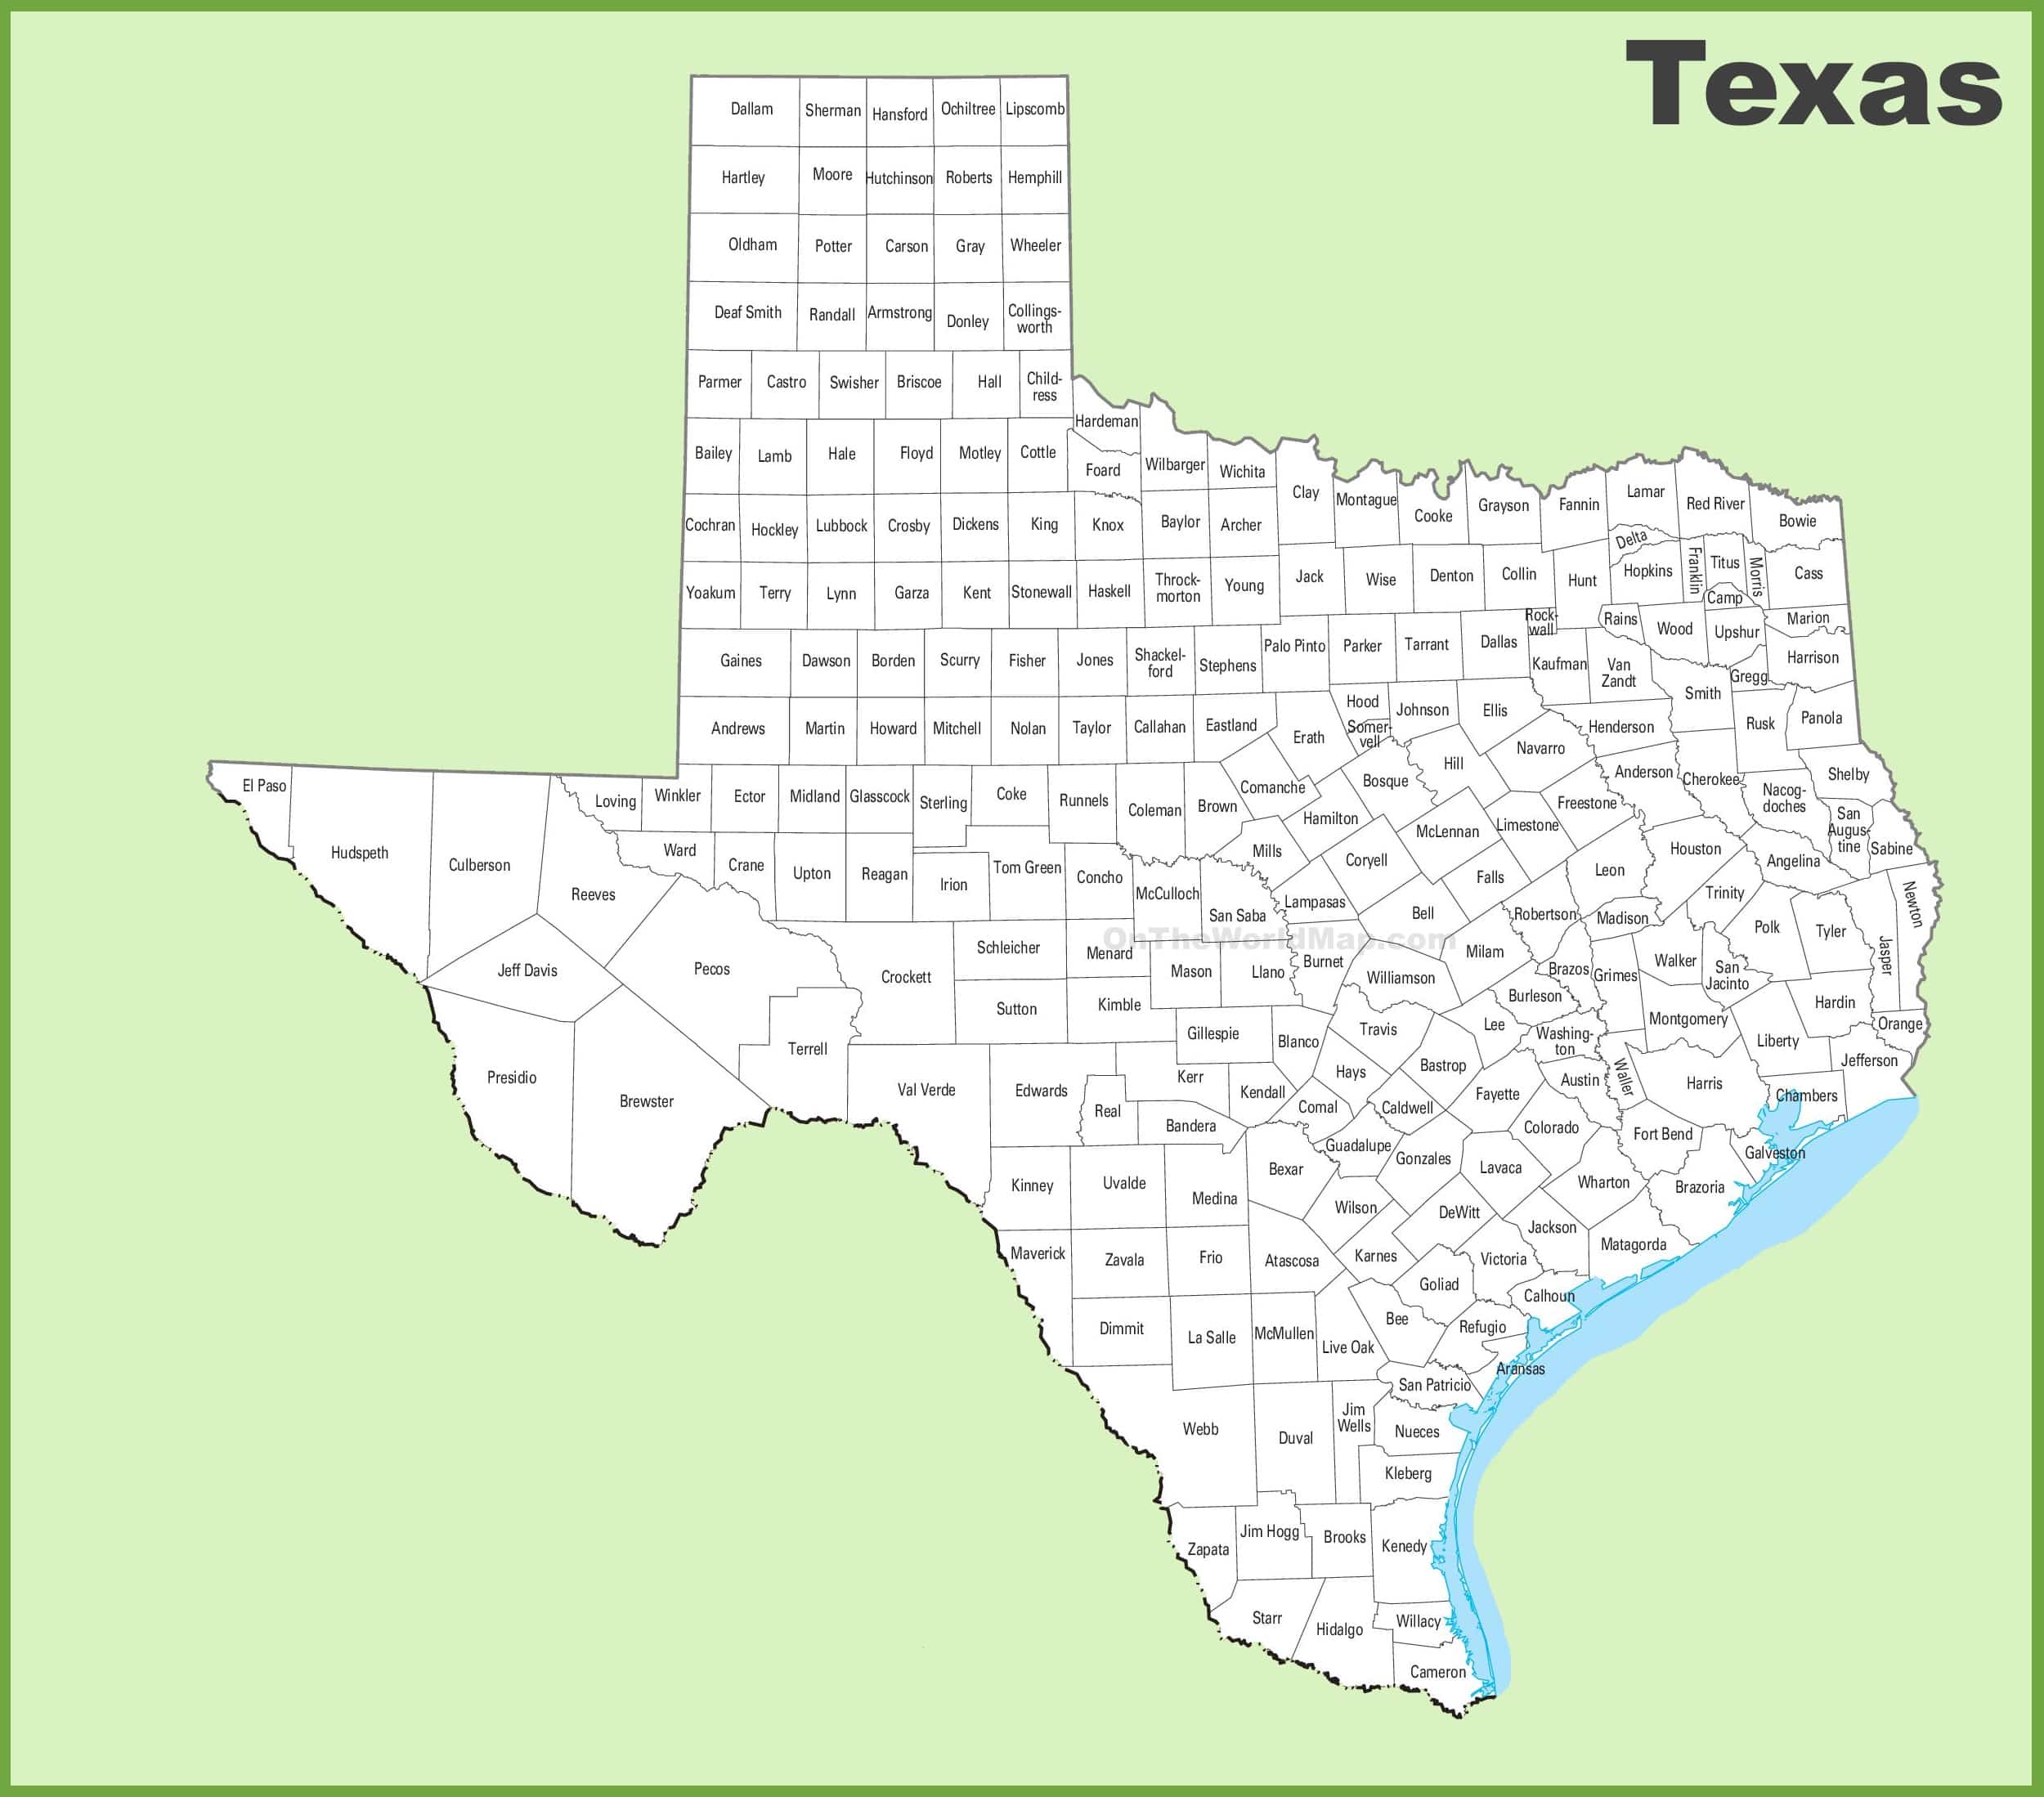 Social Security Offices in Texas